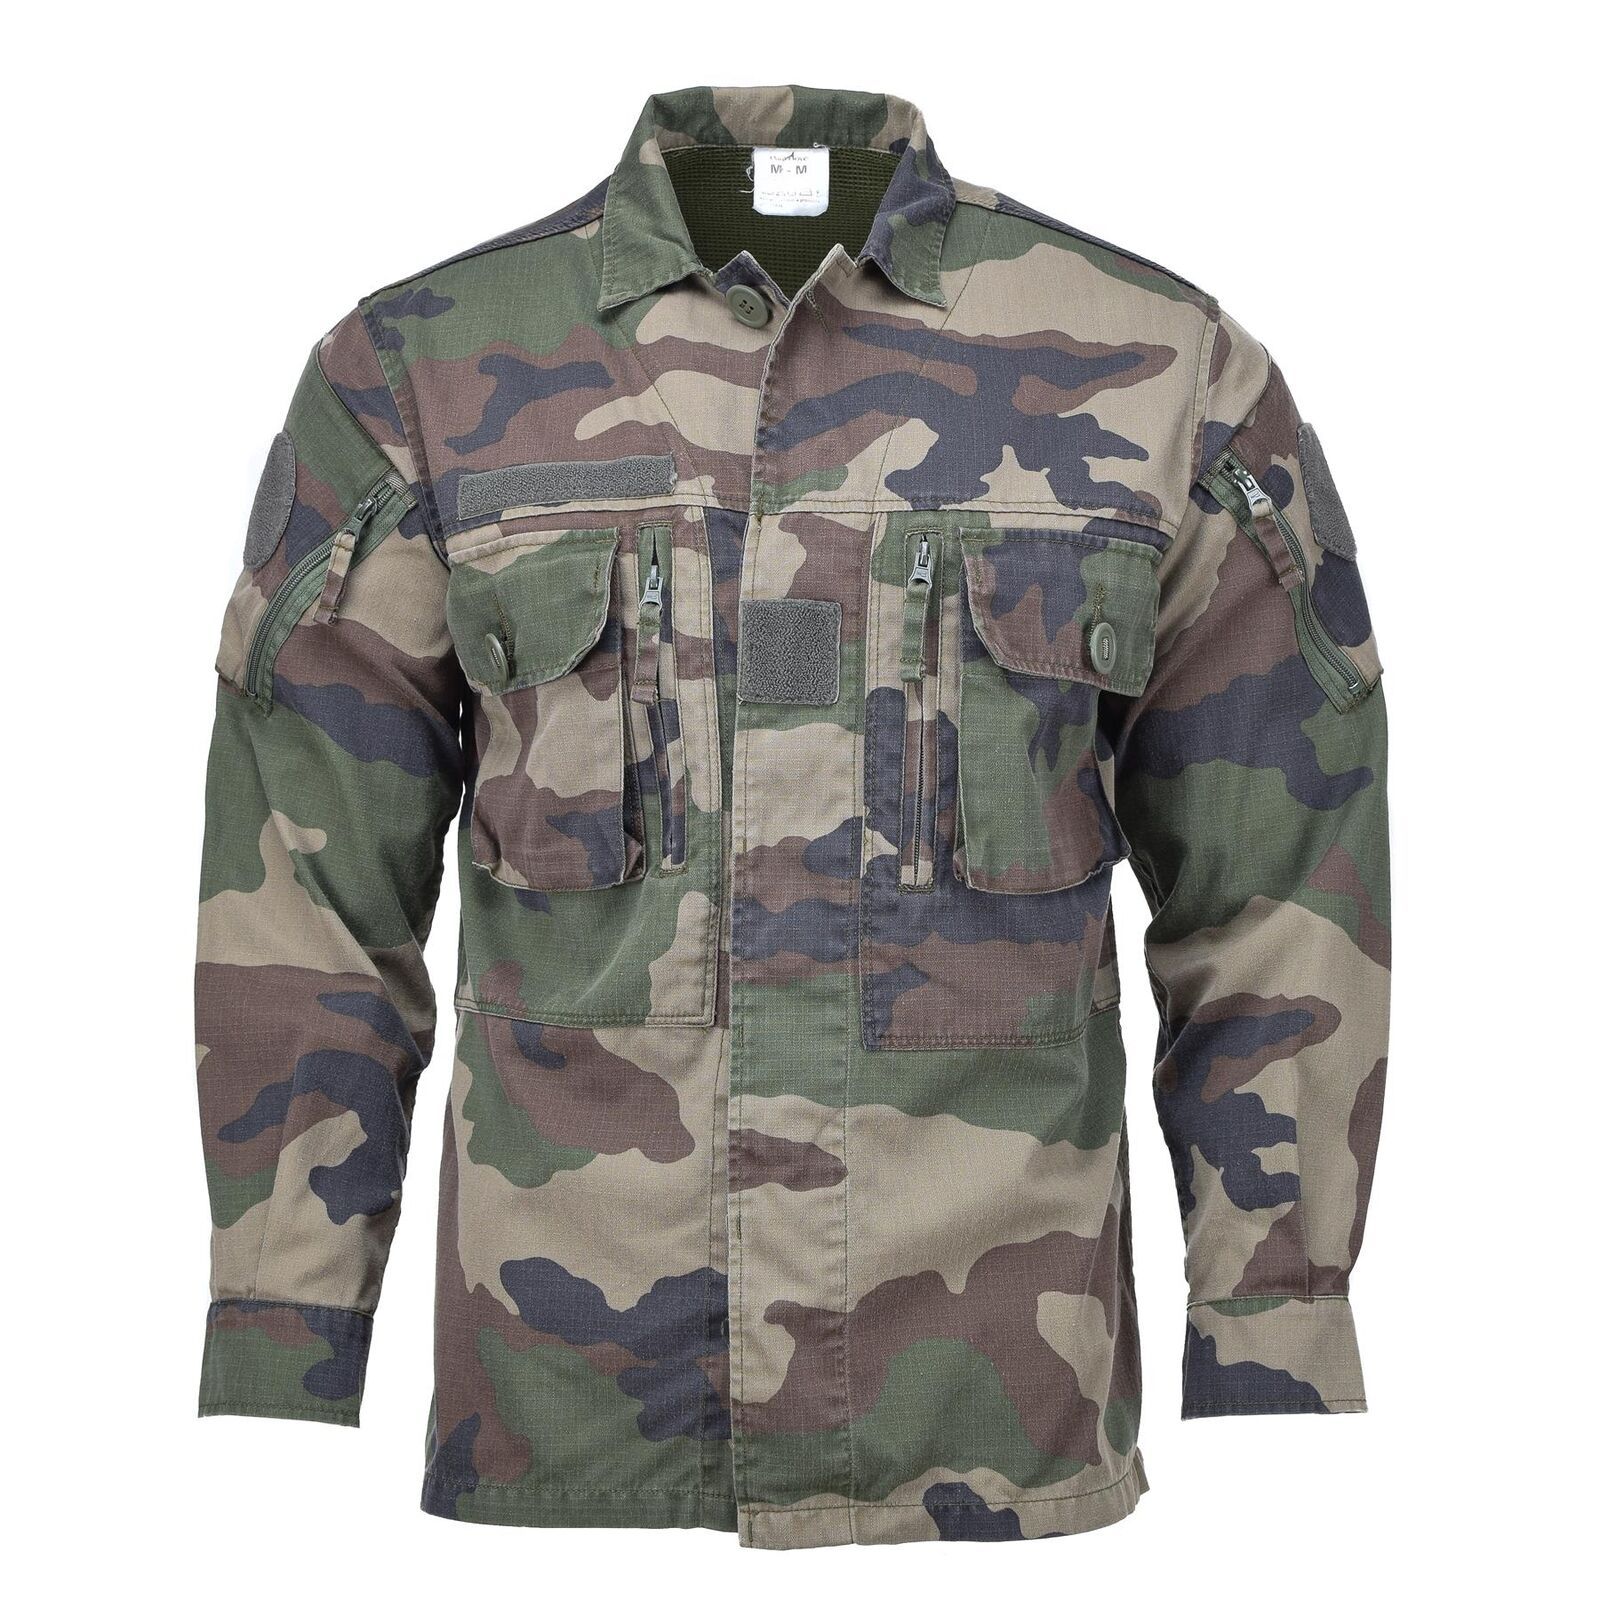 Original French military field jacket lightweight ripstop CCE camouflage shirts